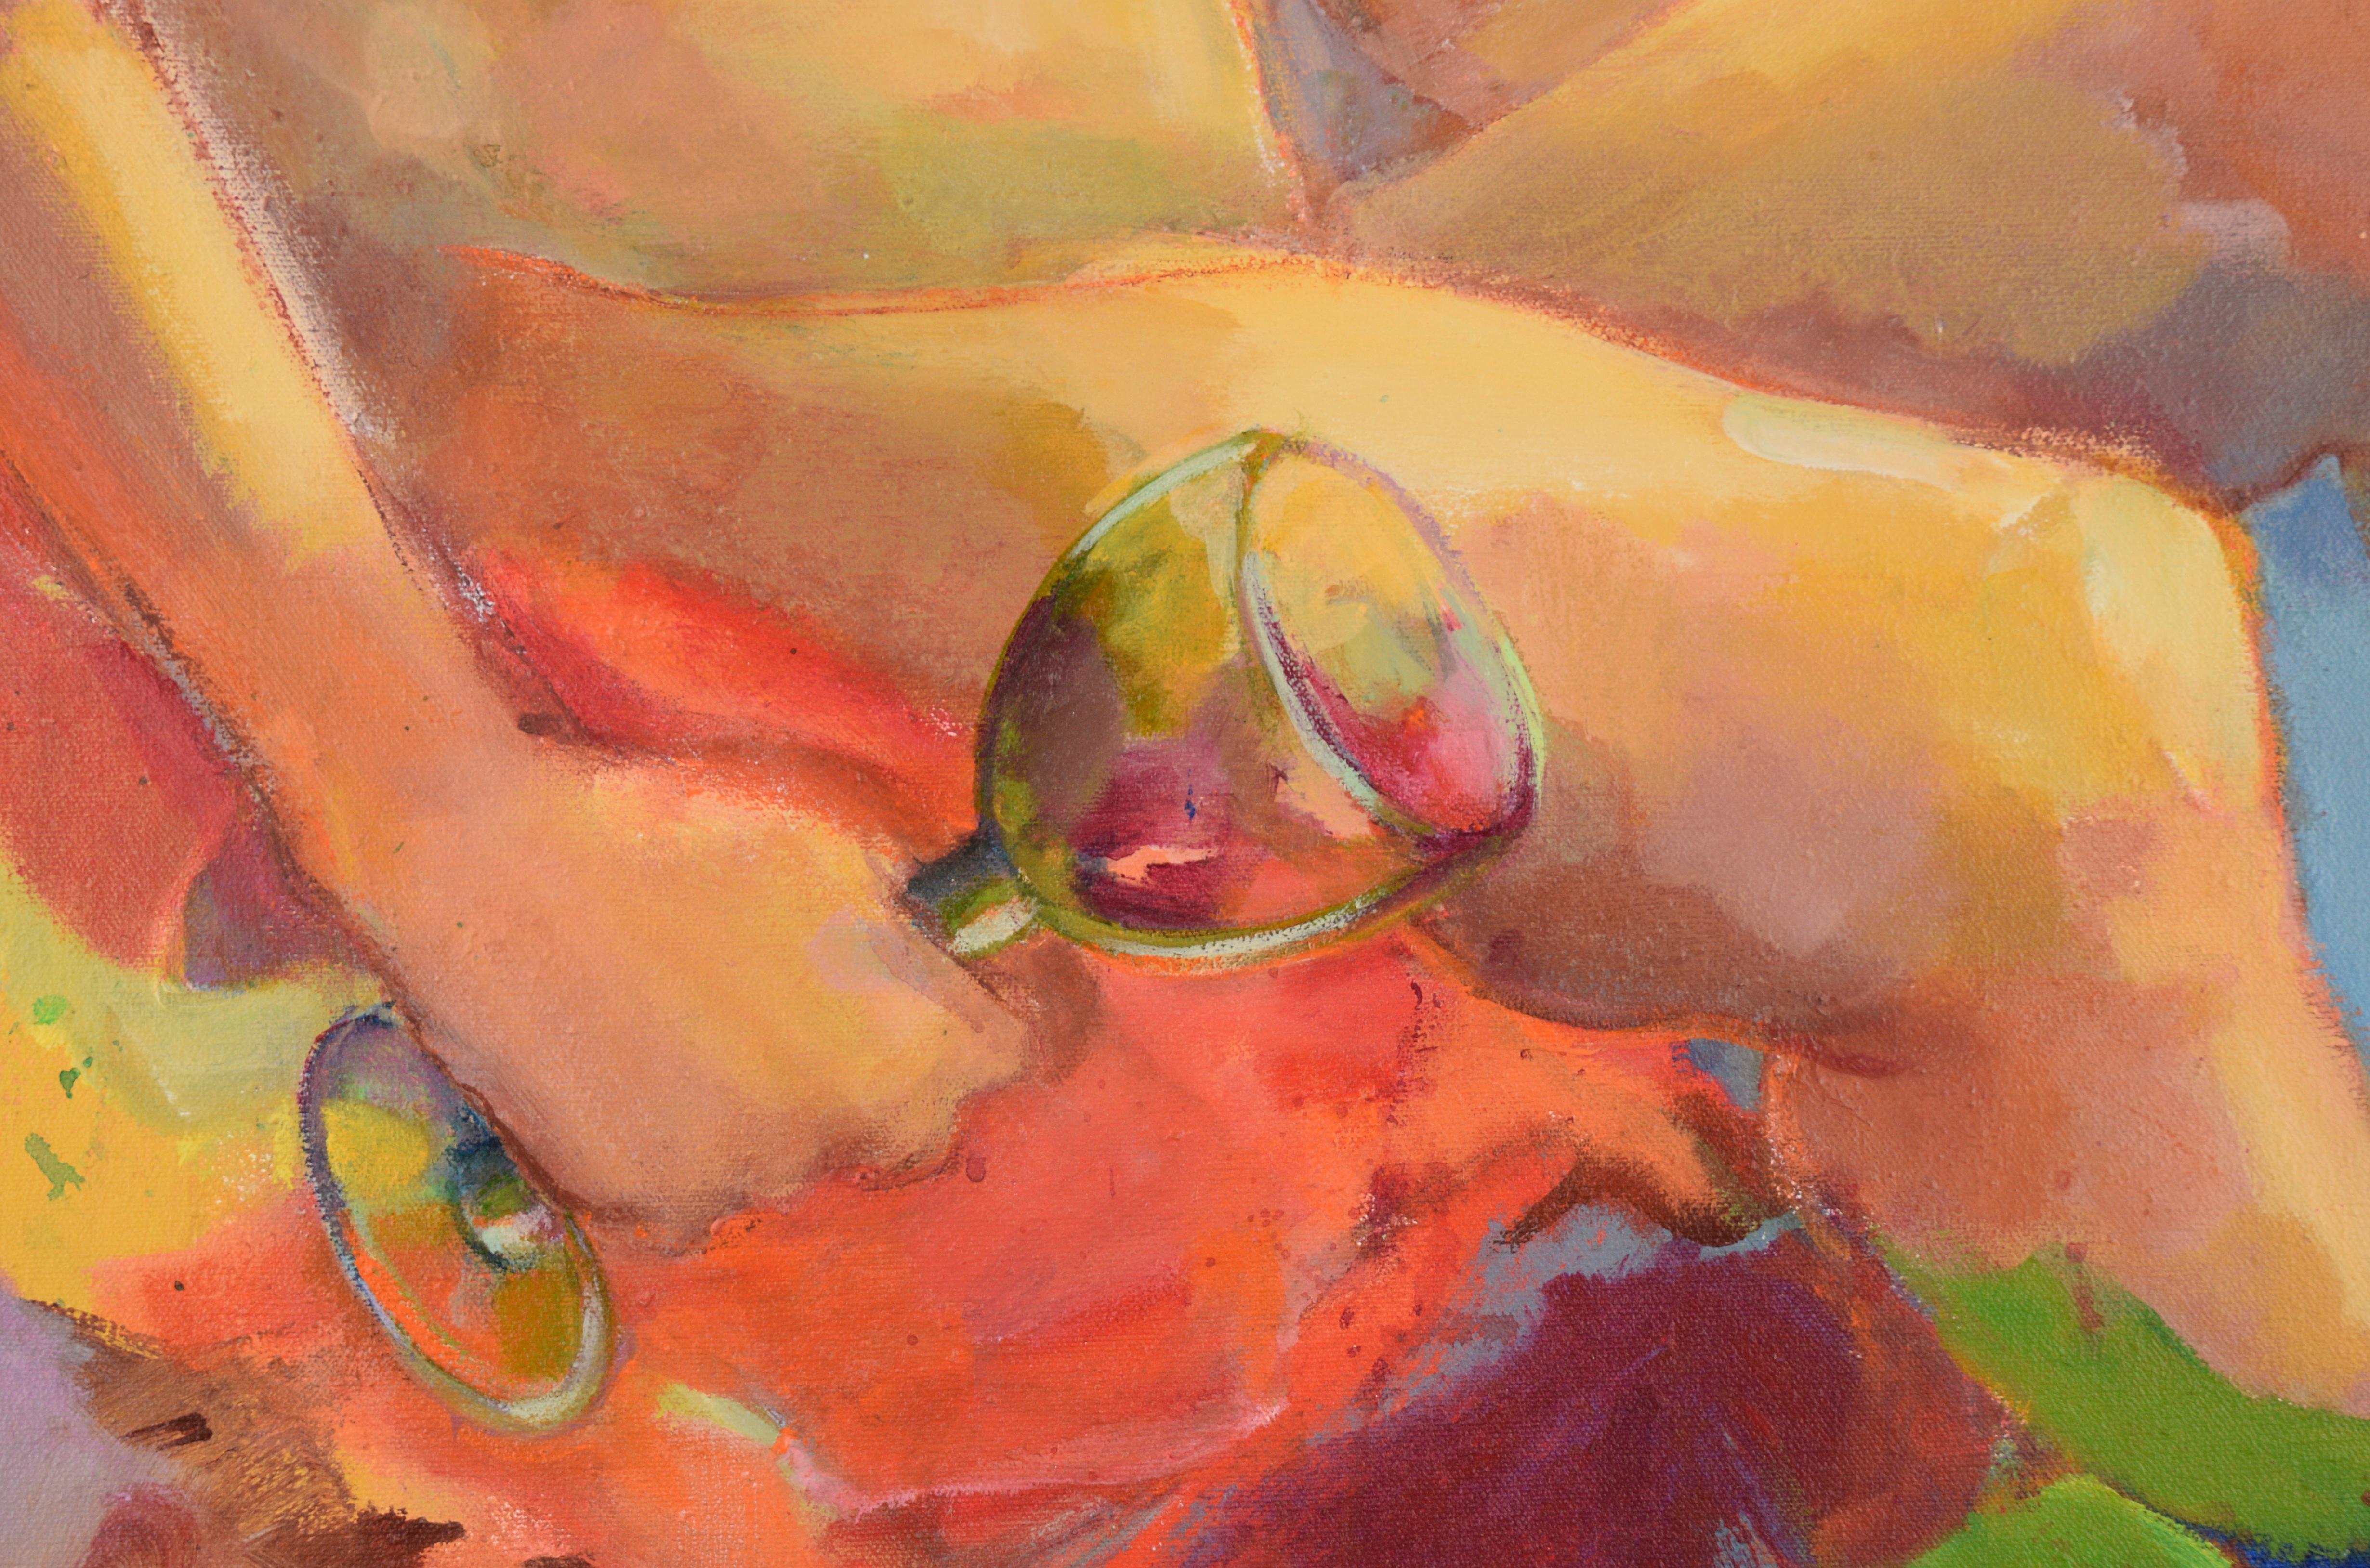 Nude with Wineglass - Mid Century Bay Area Figurative - Abstract Impressionist Painting by Marjorie Cathcart